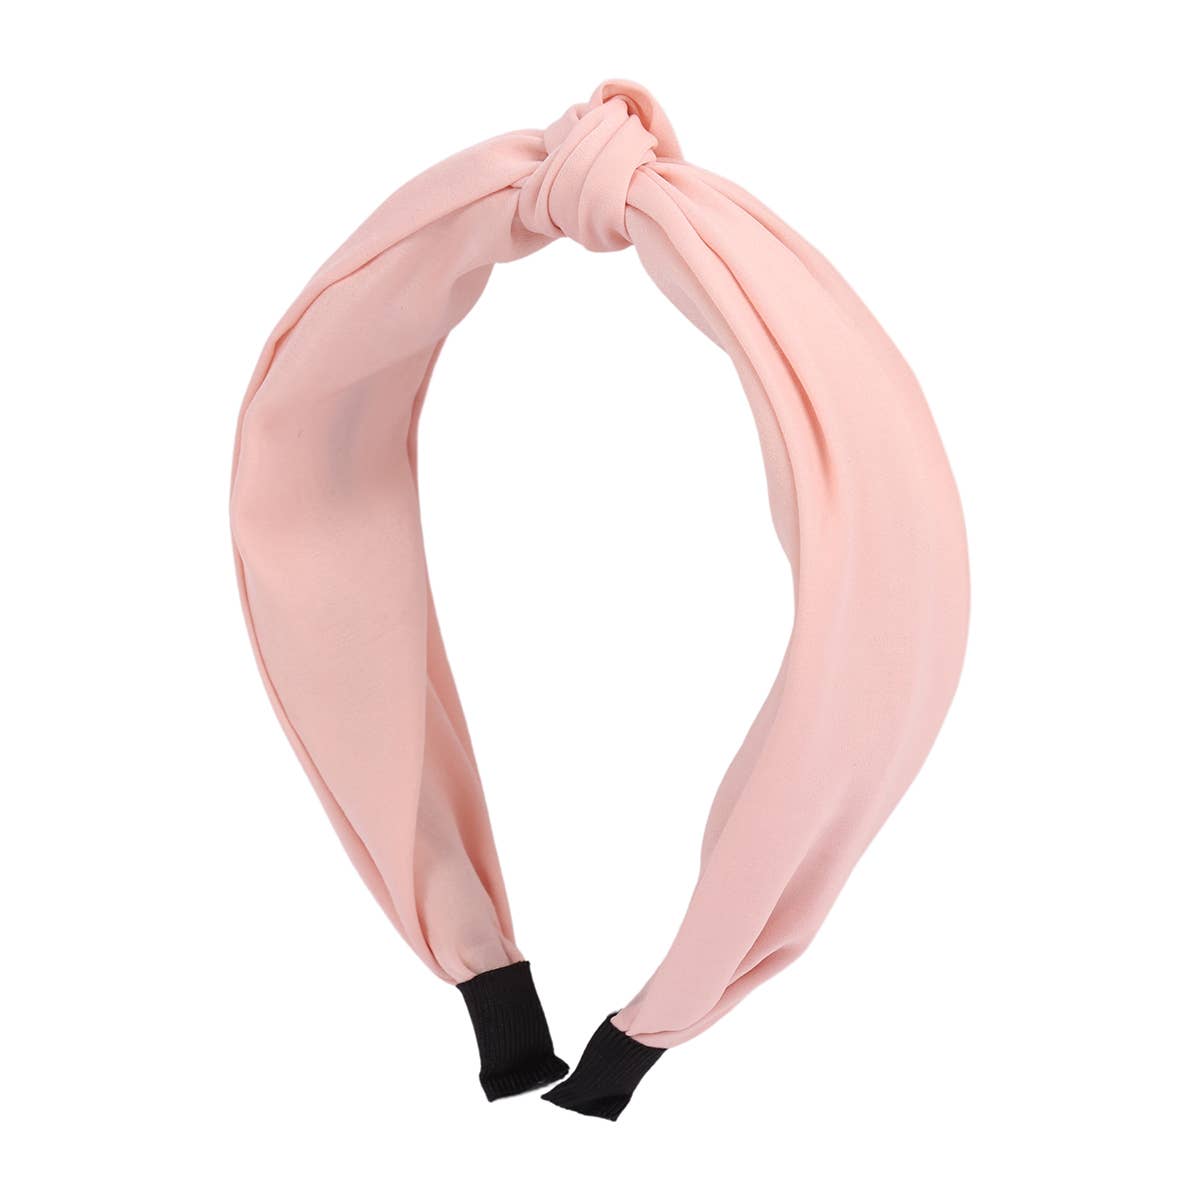 MYS Wholesale Inc - HDH3254 - KNOTTED FABRIC COATED HEADBAND